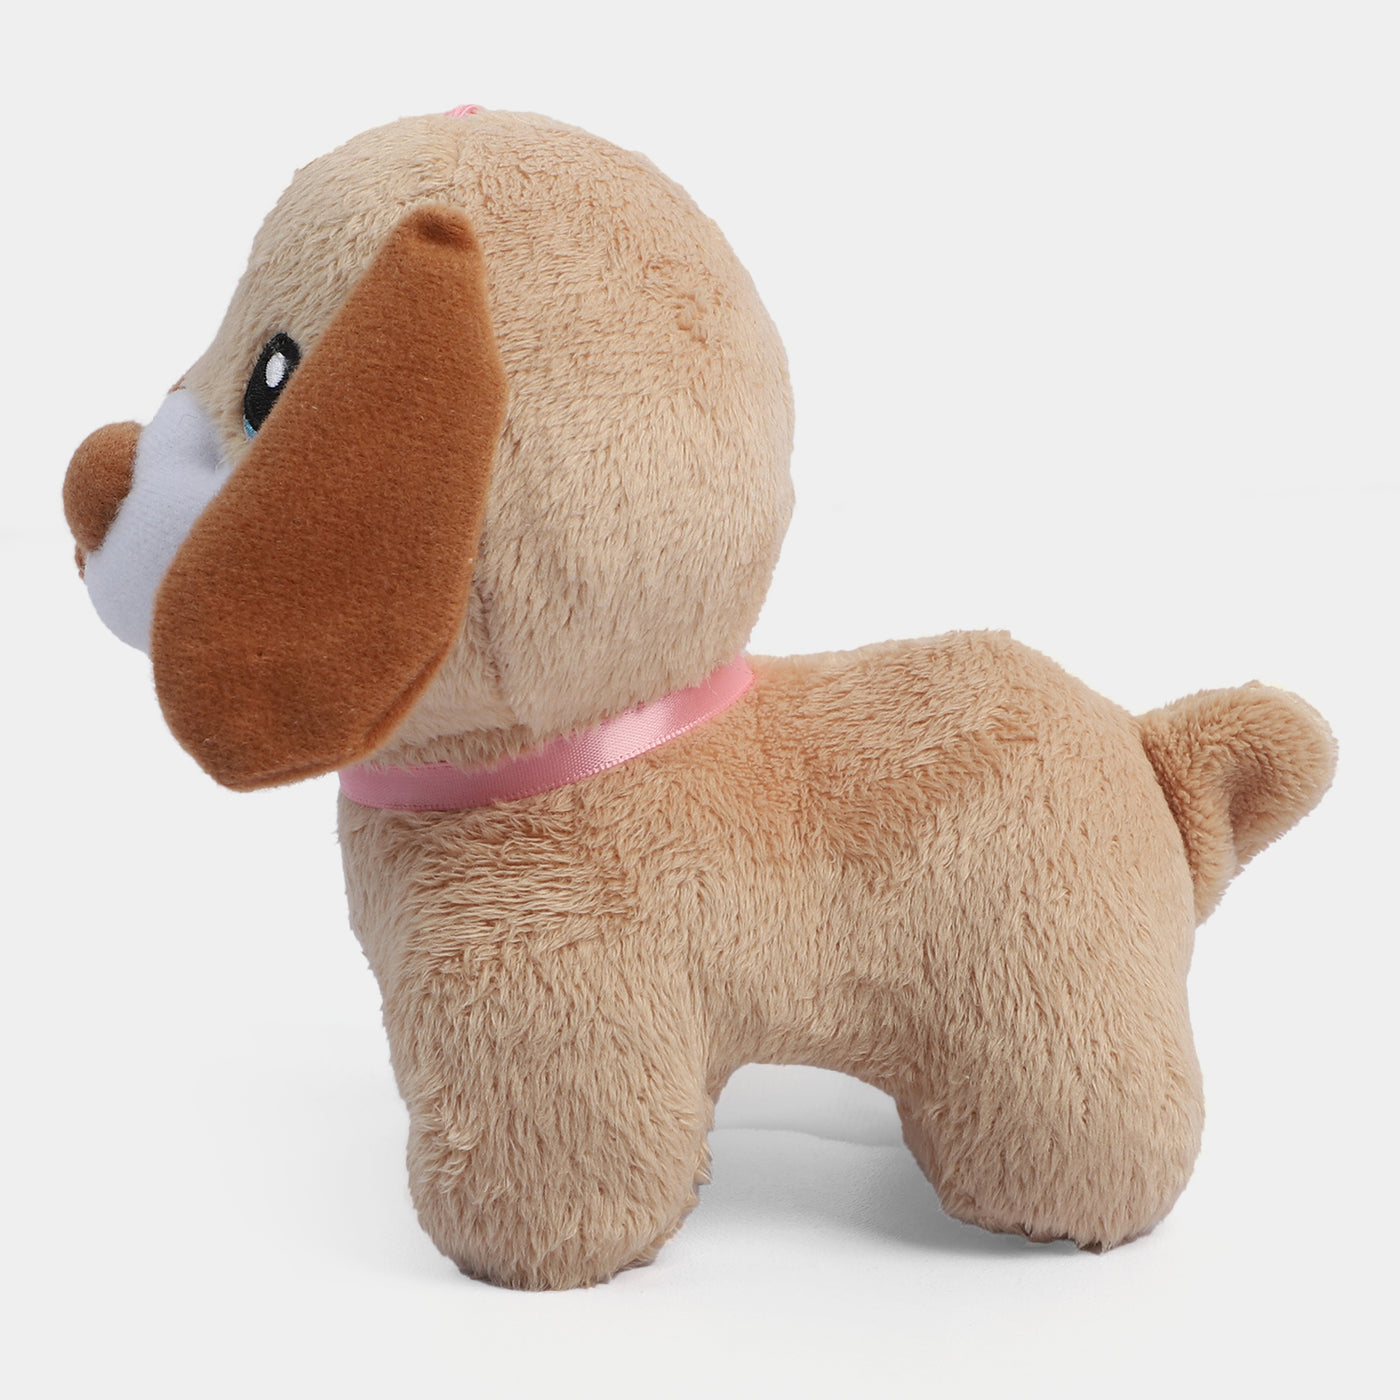 Dog Stuff Toy Small For Kids